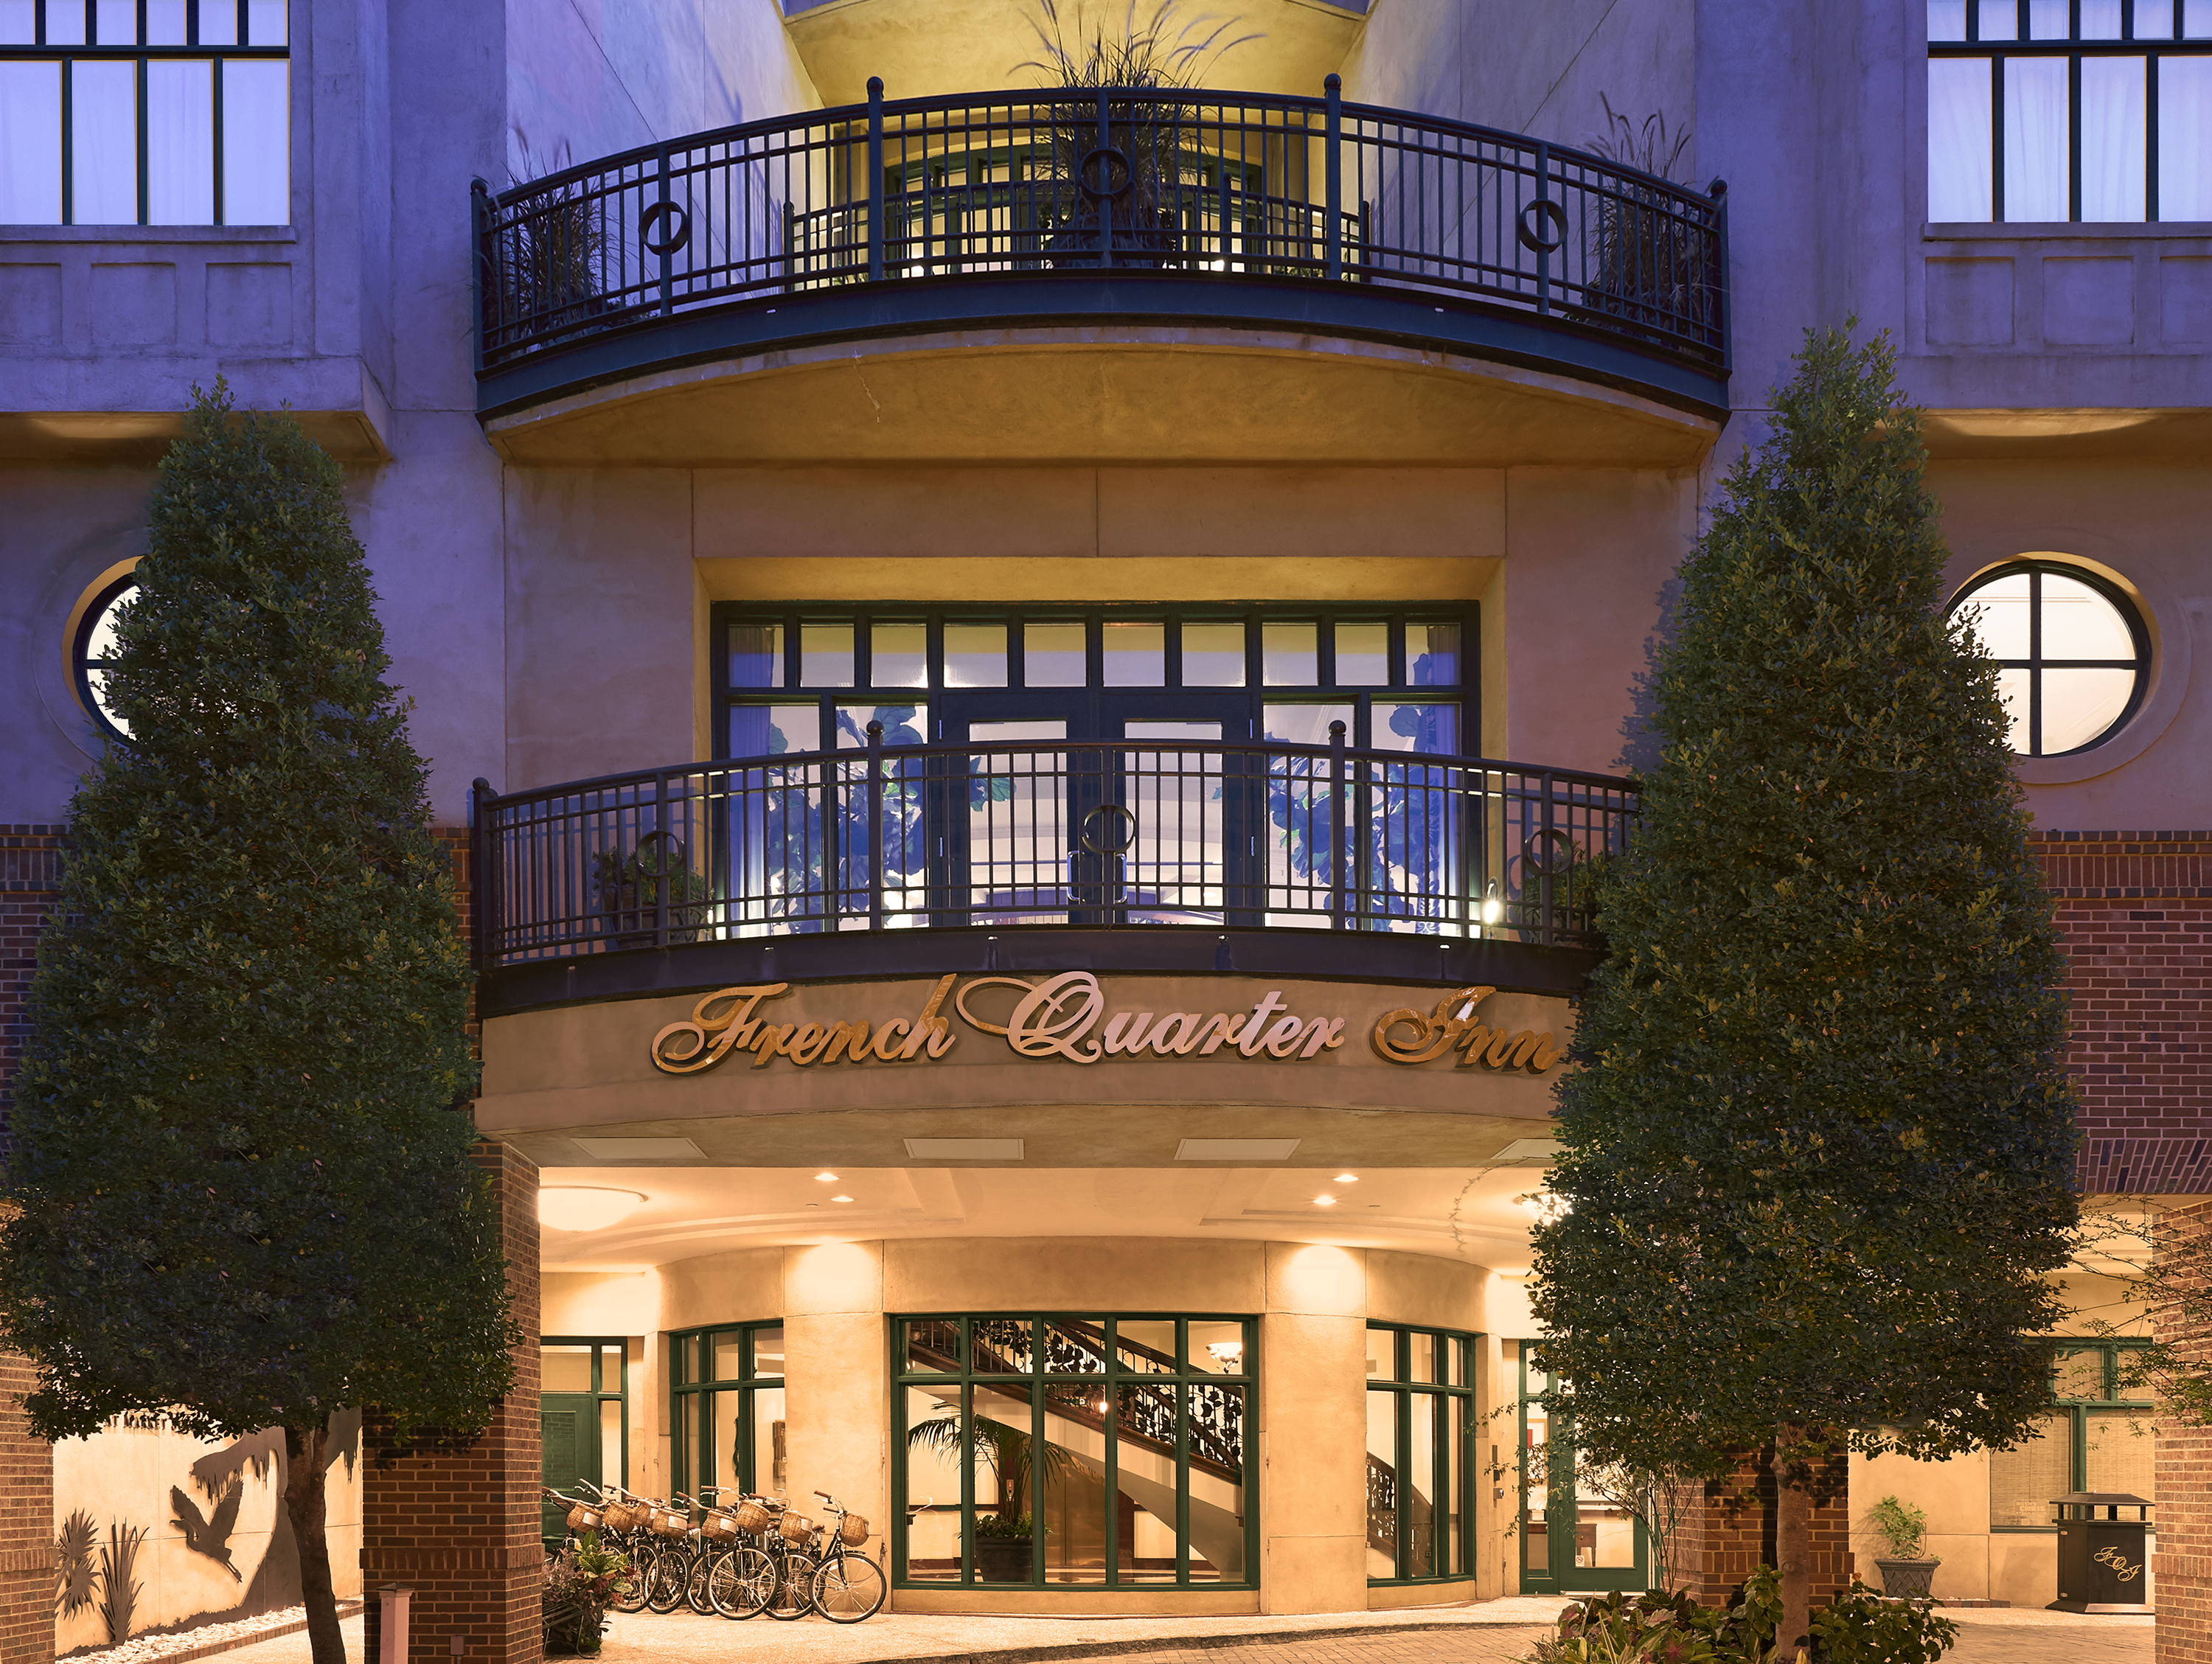 Charlestowne Hotels to implement new interface from IDeaS G3 RMS and RoomKeyPMS